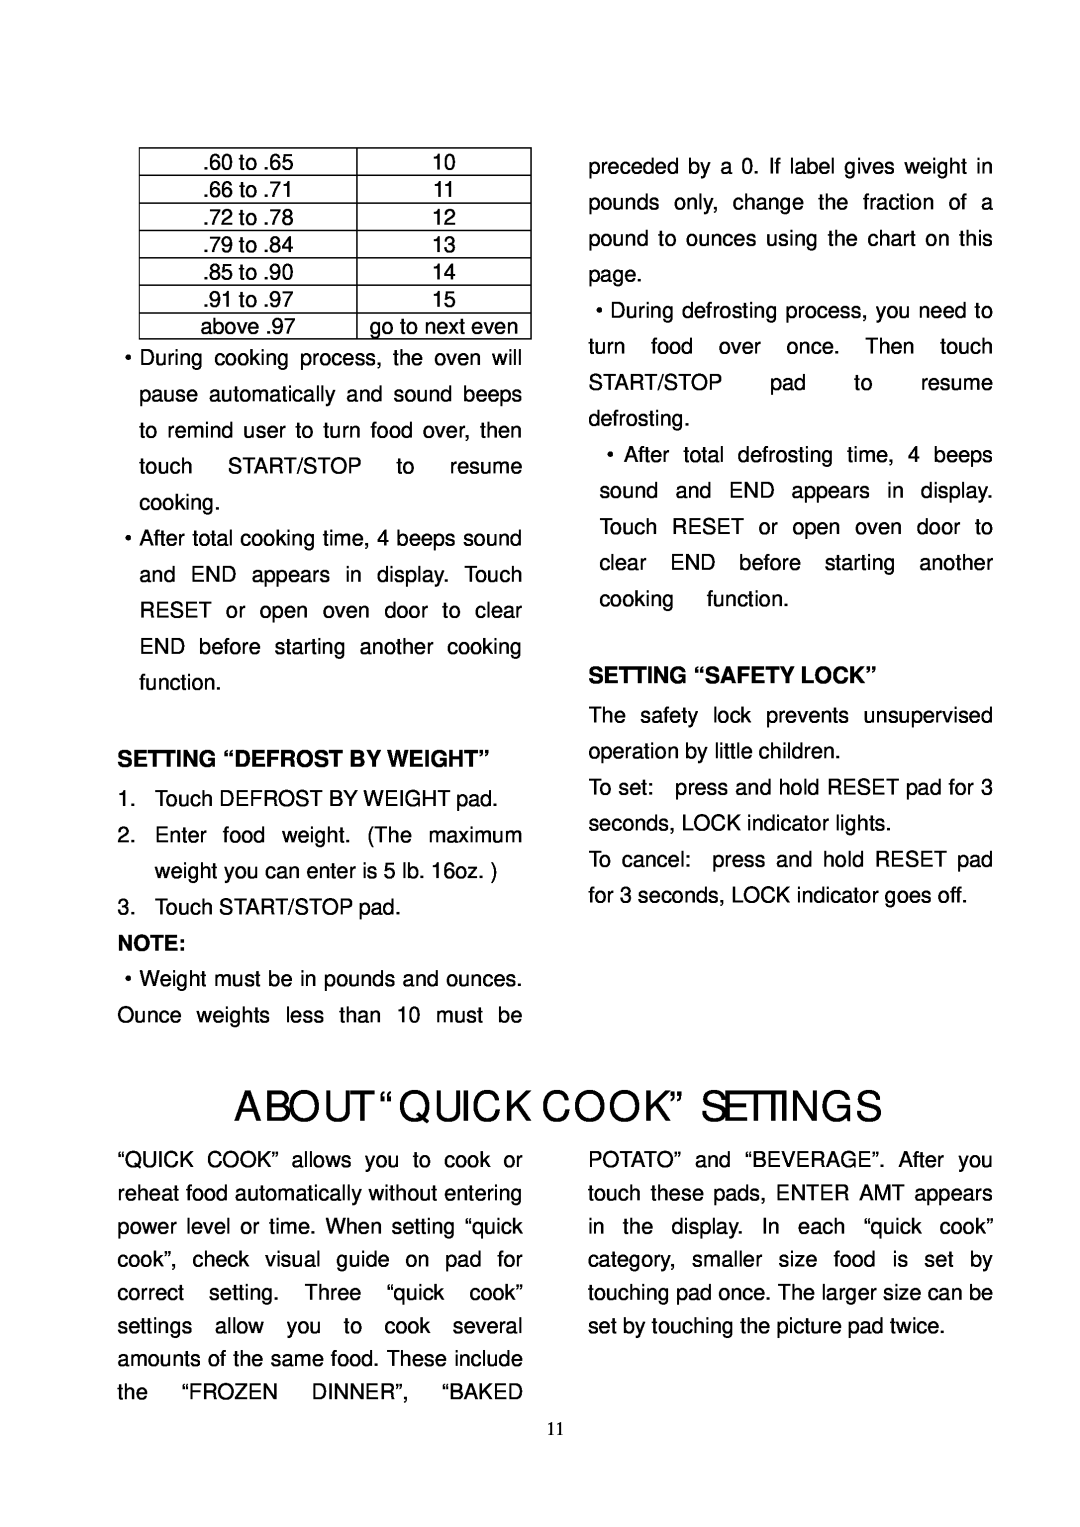 RCA RMW768 owner manual About “Quick Cook” Settings, Setting “Defrost By Weight”, Setting “Safety Lock” 